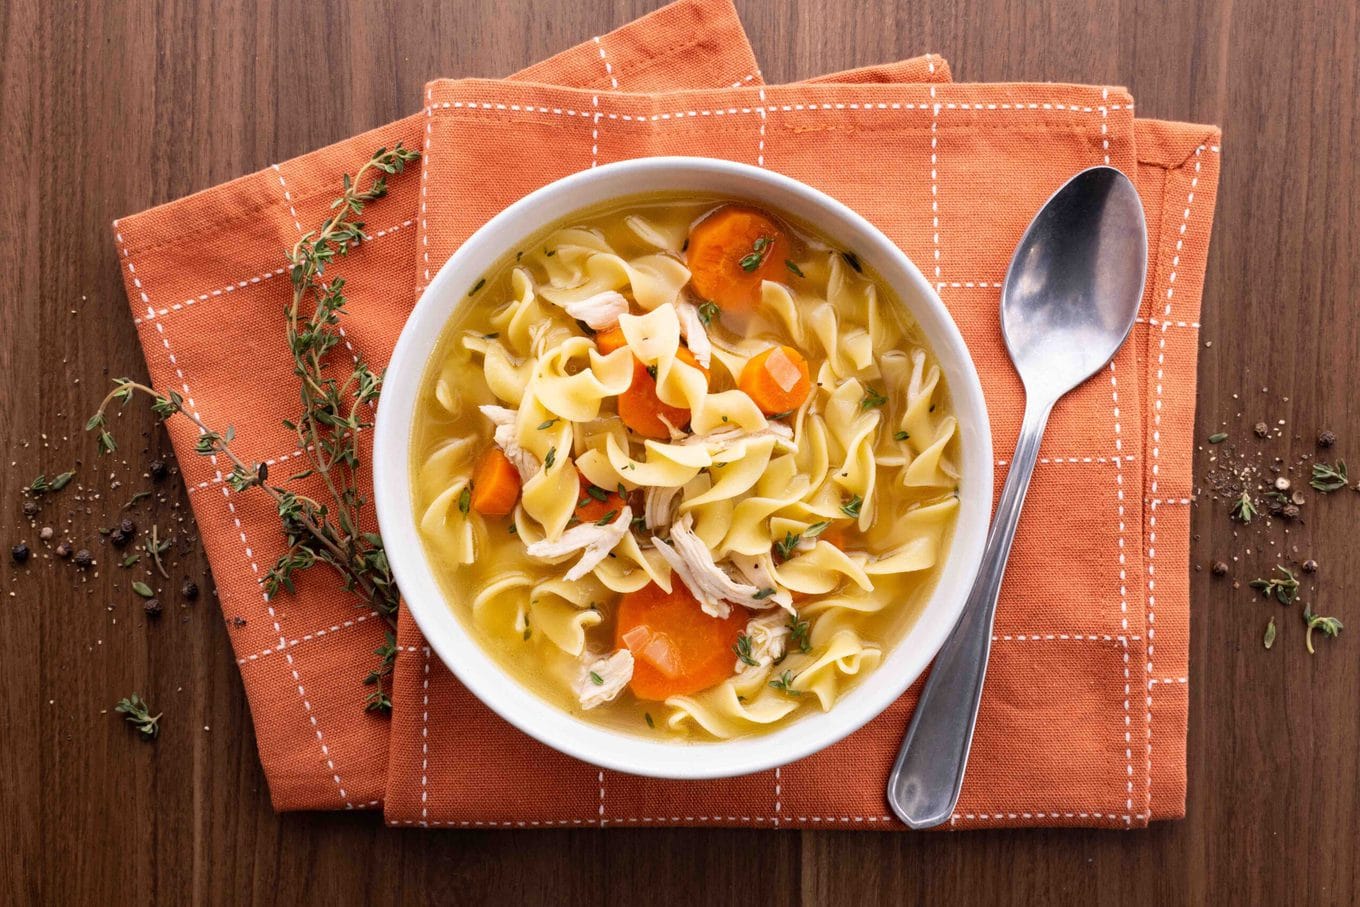 10 Awesome Soup Recipes!
